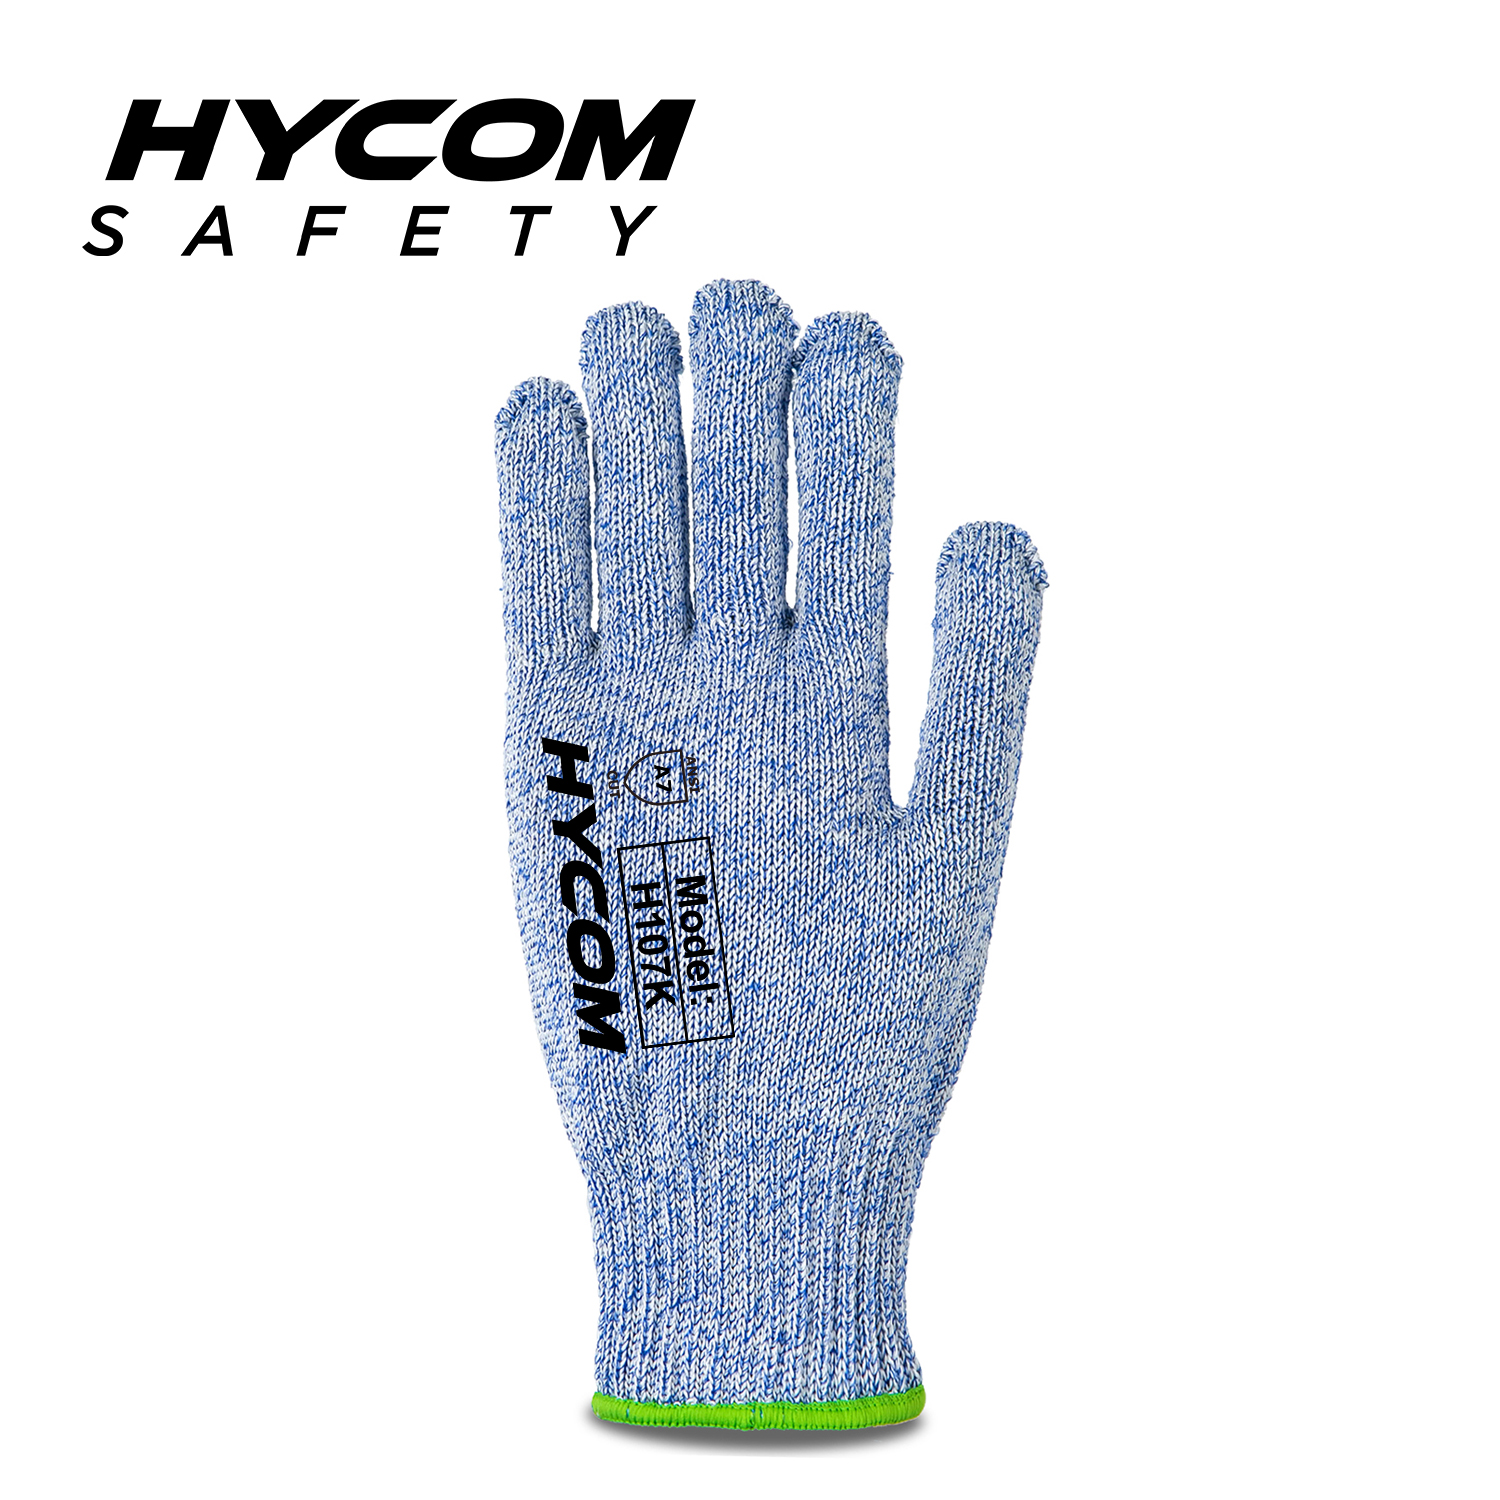 HYCOM 10G ANSI 7 HPPE Cut Resistant Glove FDA Food Contact Directly Butcher Glove